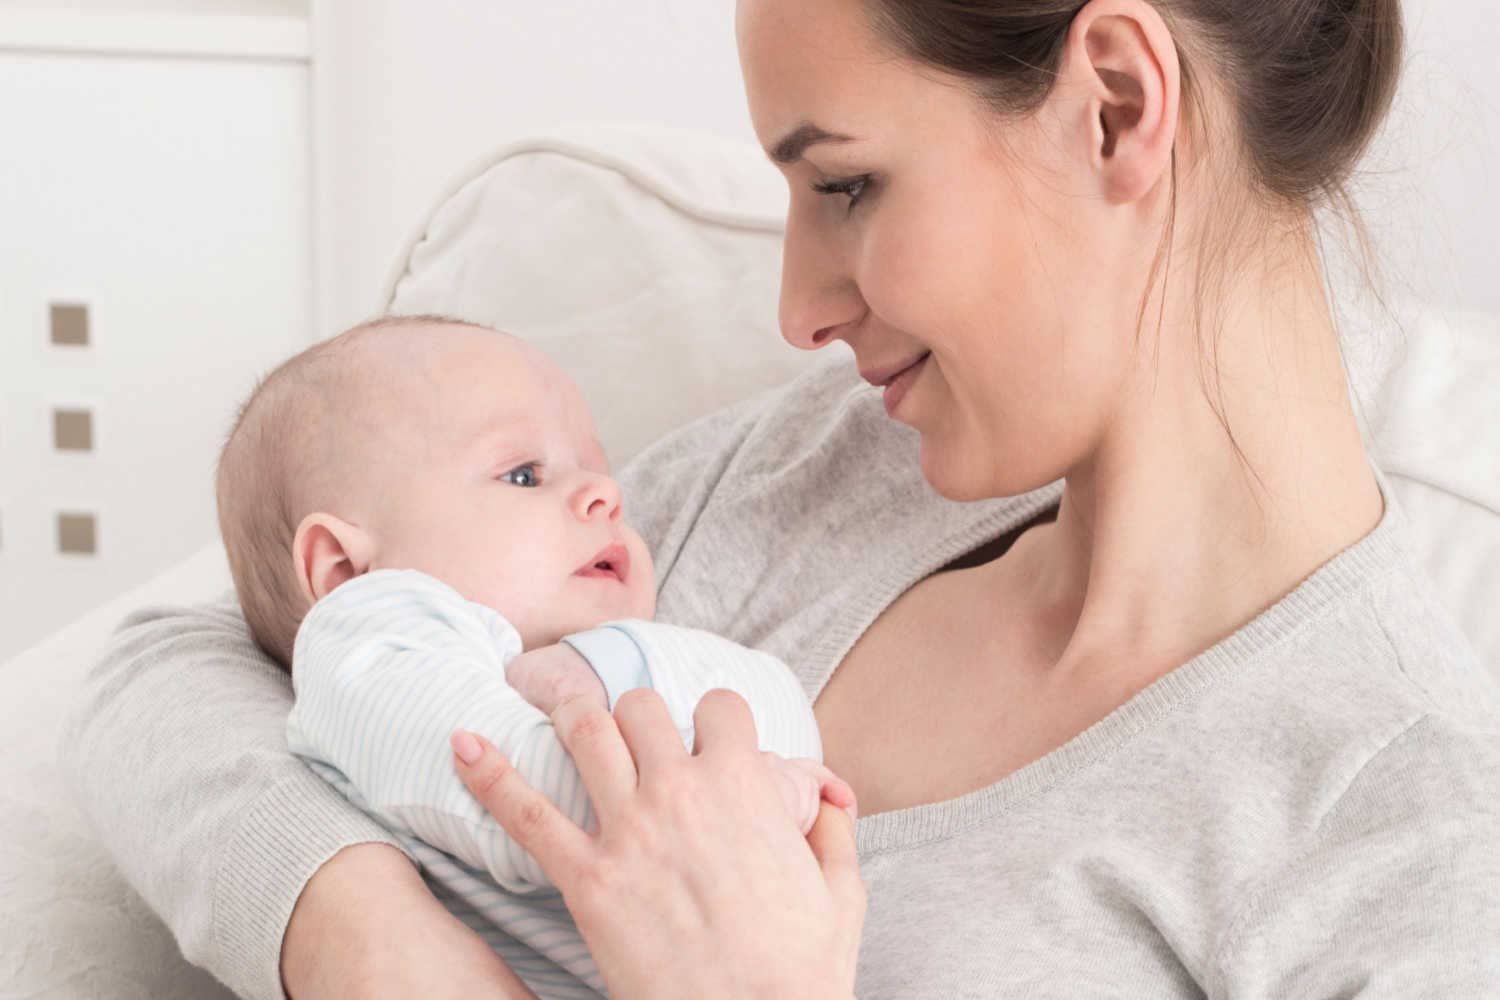 Factors Should Be Considered Before Combining Bottle And Breastfeeding